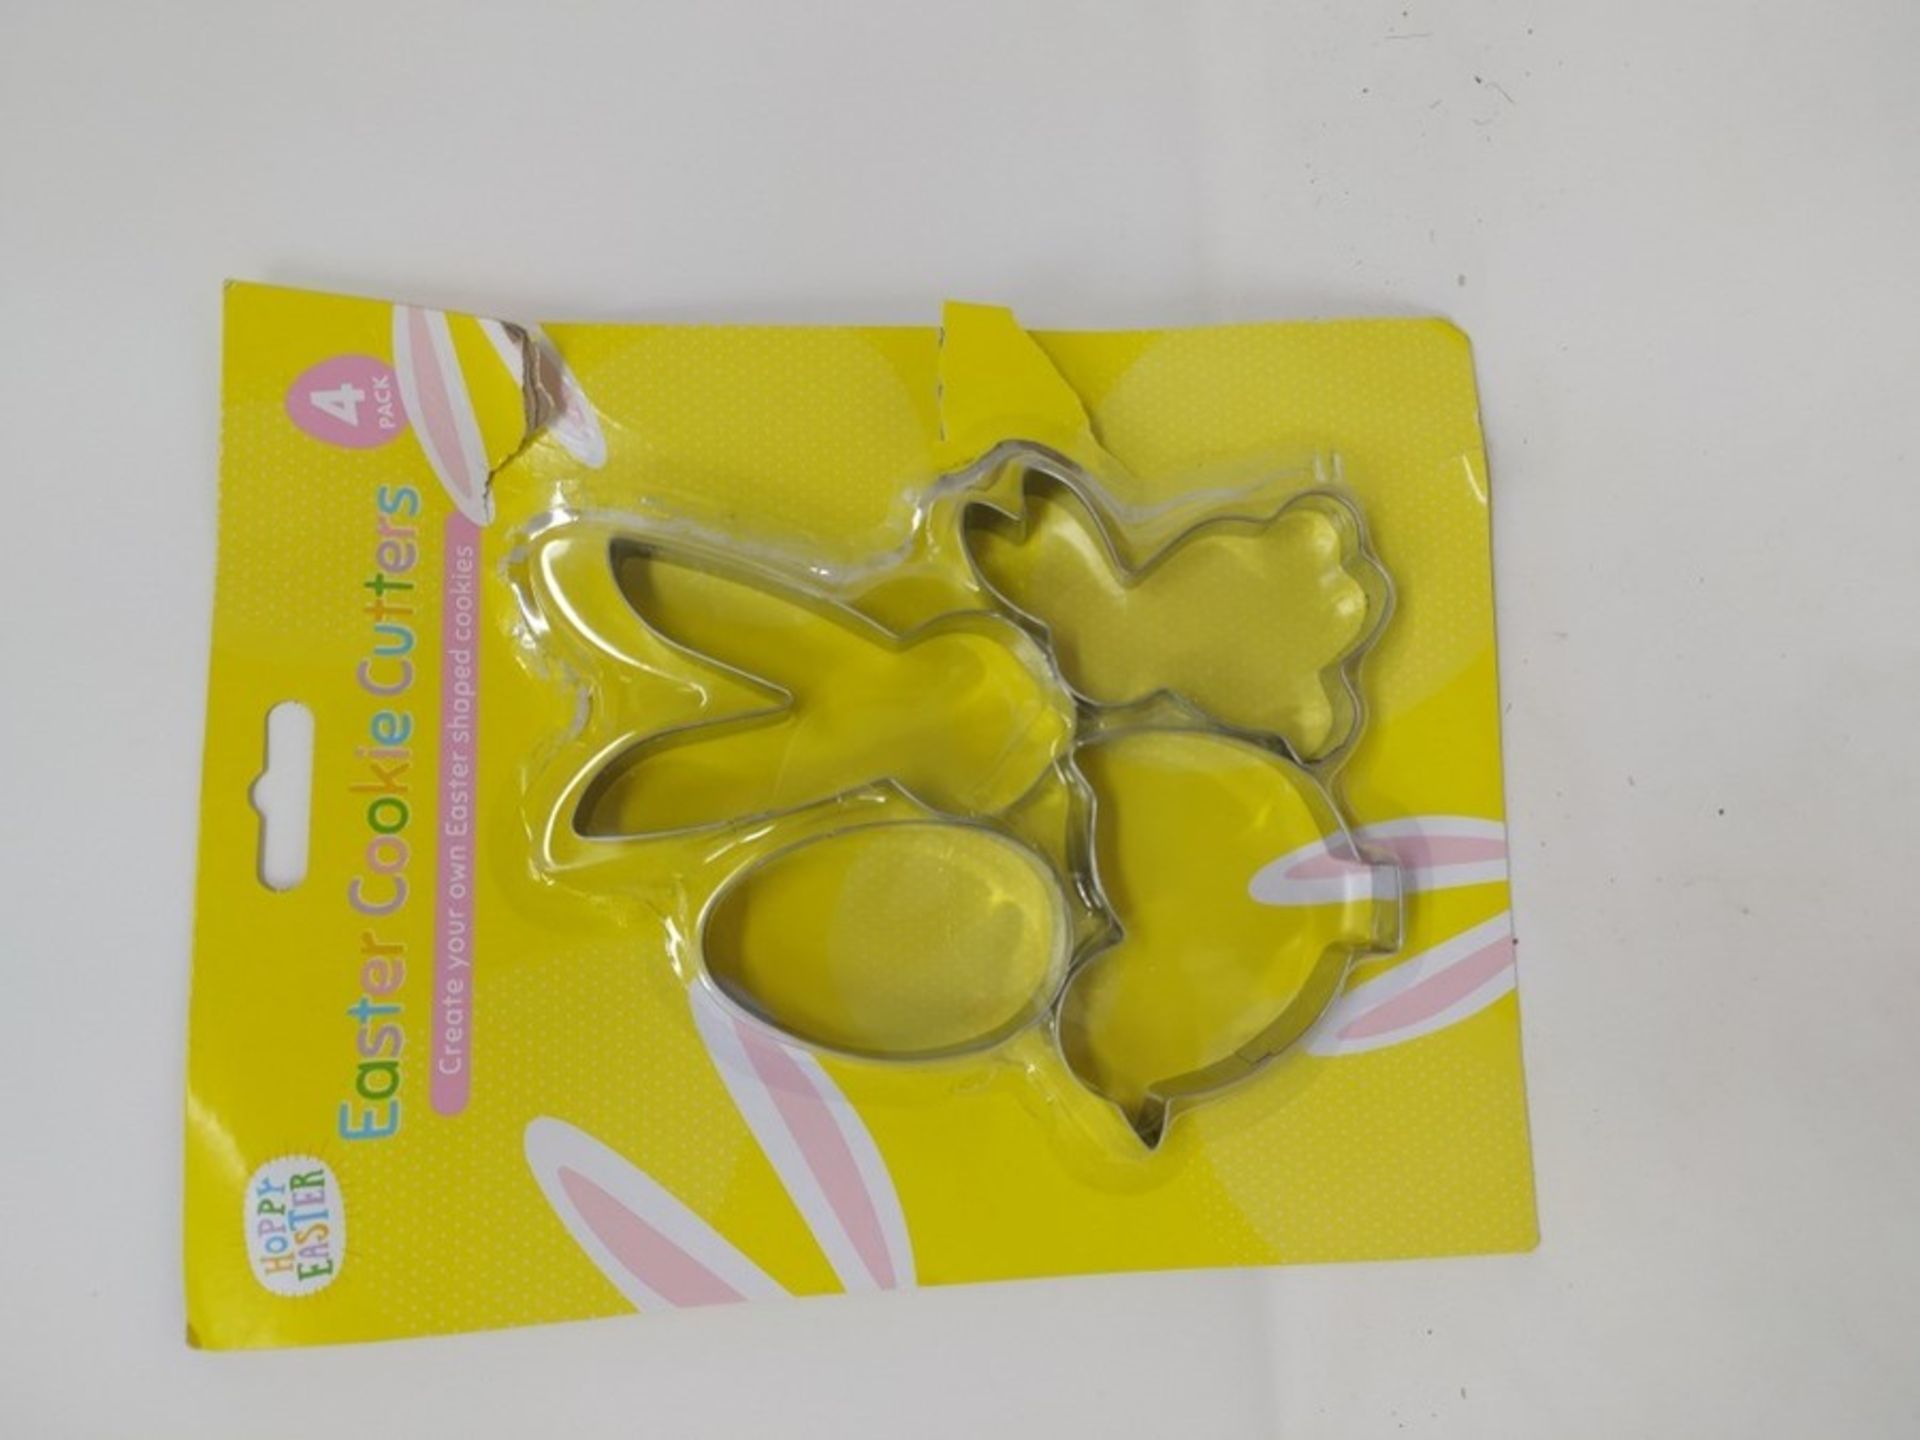 ITP G24042 Easter Steel Cookie Cutters Mould Cake Biscuit Baking Tool Decoration Set 4 - Image 2 of 4